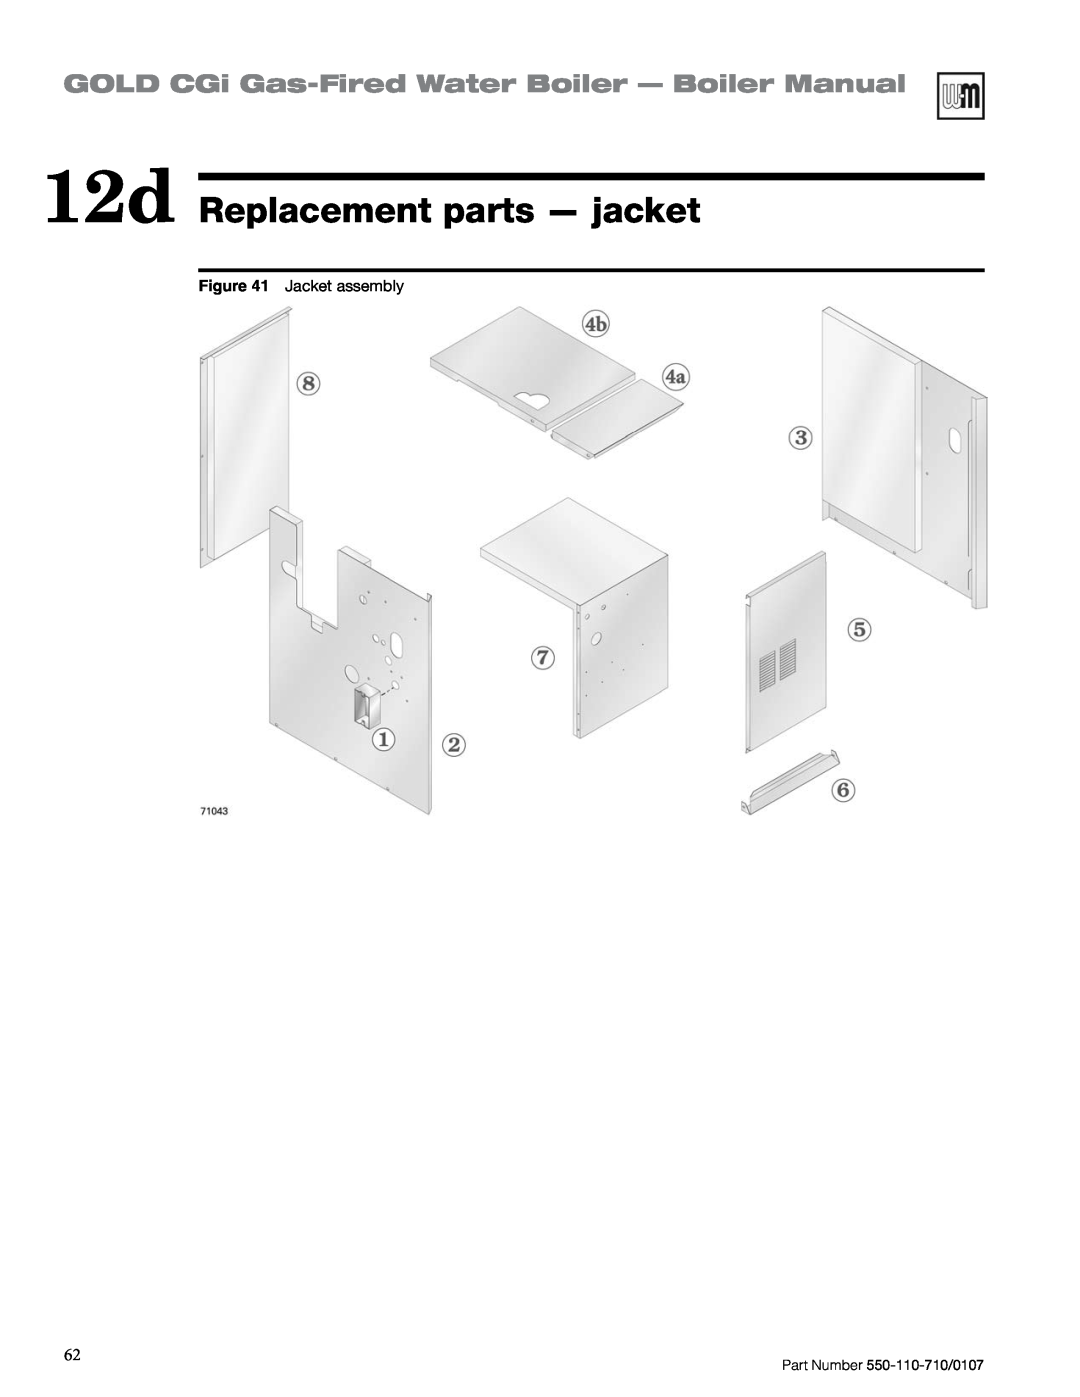 Weil-McLain Series 2 manual 12d Replacement parts - jacket, GOLD CGi Gas-FiredWater Boiler — Boiler Manual, Jacket assembly 